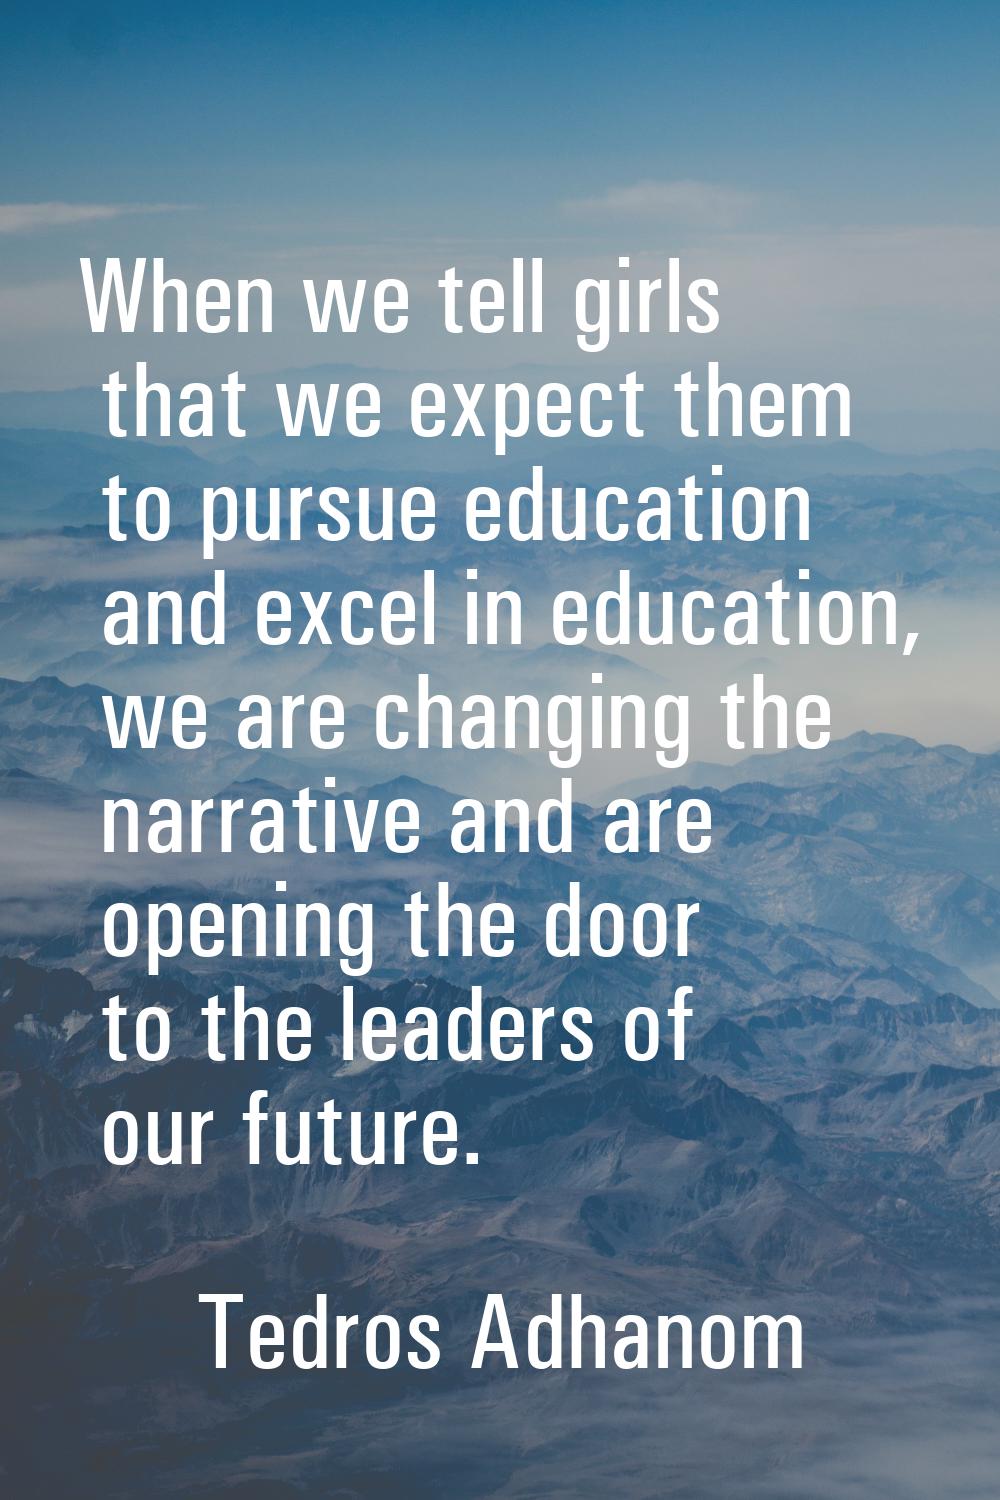 When we tell girls that we expect them to pursue education and excel in education, we are changing 